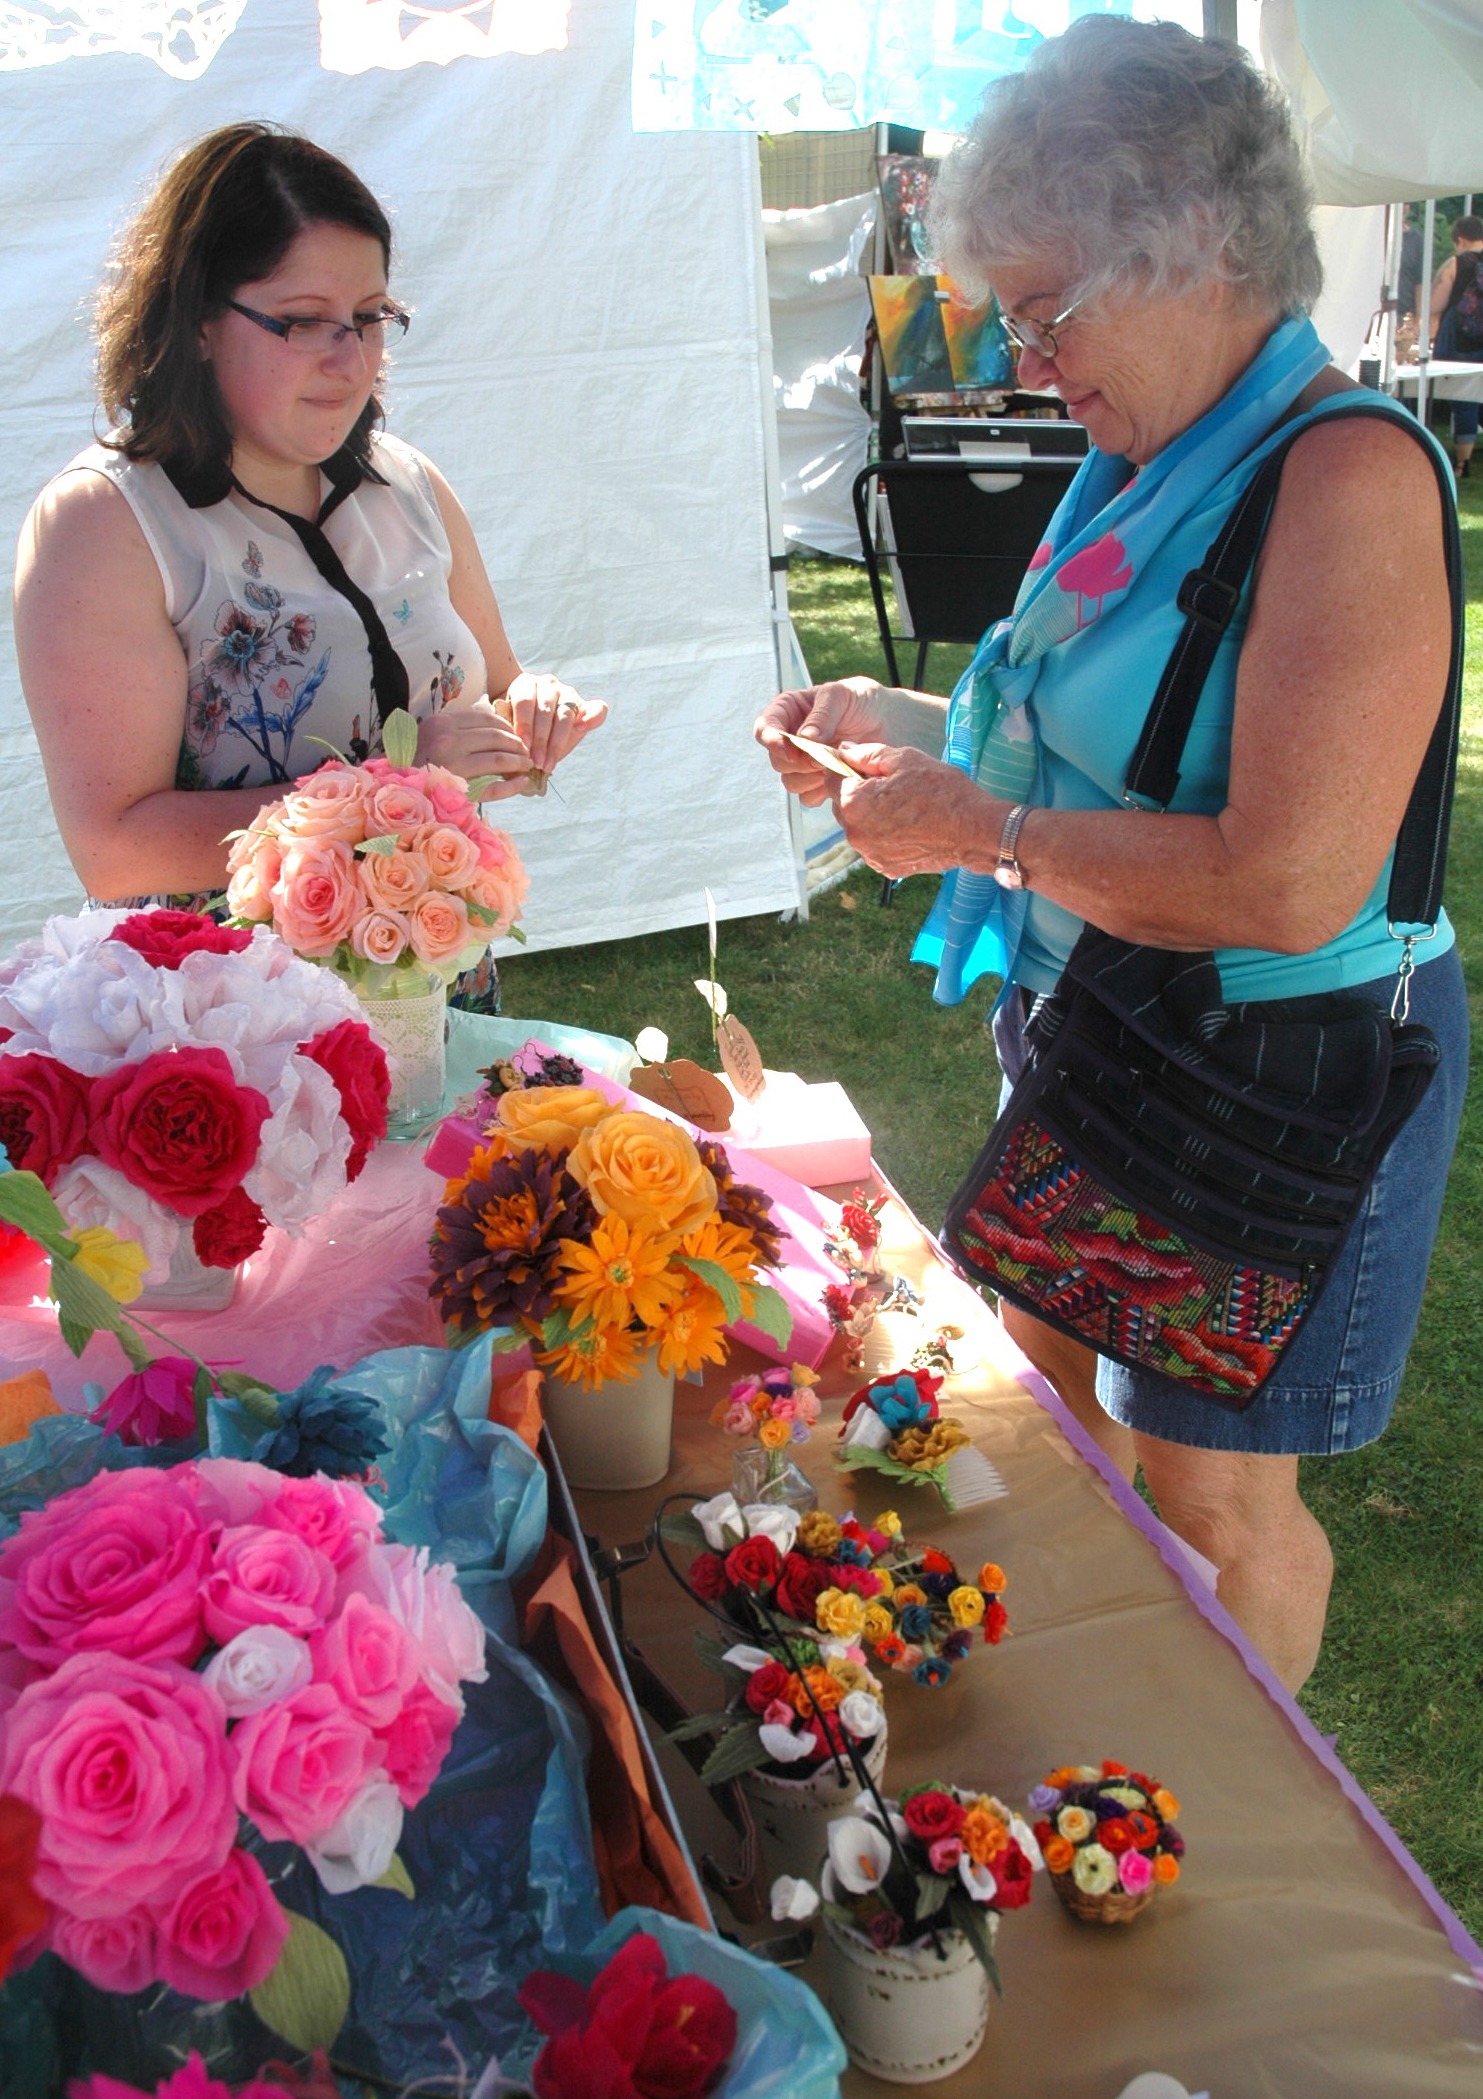 Kirk Boxleitner/Staff PhotoAdriana Armendariz sells hand-sculpted jewelry to Jeannie Lish at the Arlington Arts Council’s ninth annual “Art in the Park” event Sept. 10.